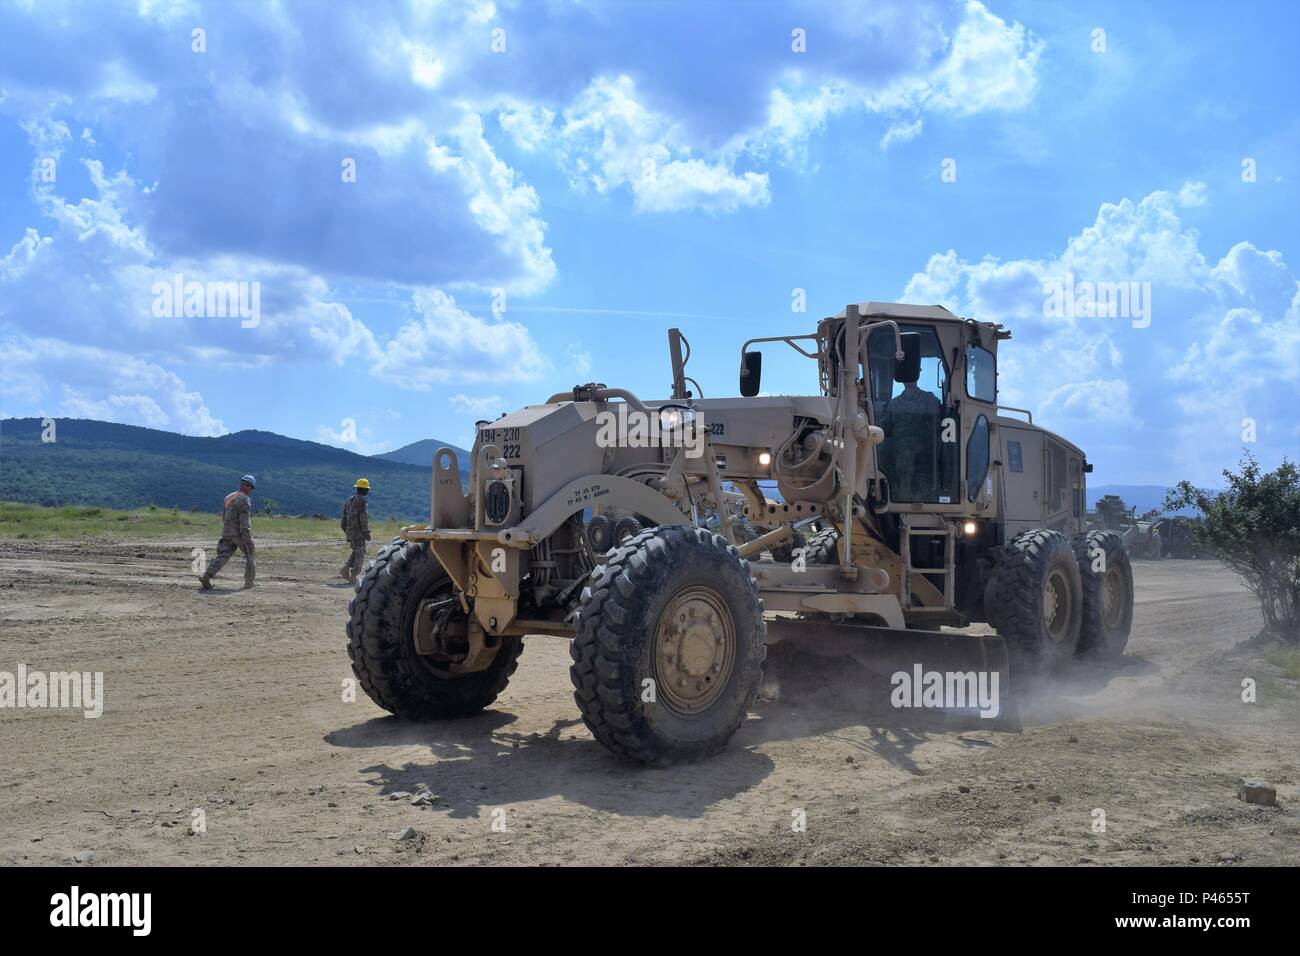 U.S. Army engineers with the 858th Horizontal Engineer Company, 223rd Engineer Battalion, 168th Engineer Brigade, Mississippi Army National Guard use heavy construction equipment to construct an ammunition holding area on June 12, 2016 during Operation Resolute Castle at Novo Selo Training Area, Bulgaria.  Once complete, the ammunition holding area will allow larger units to conduct training operations in Bulgaria.  During Resolute Castle, Engineer Brigades from both the Mississippi and Tennessee Army National Guard are teaming up to improve military infrastructure in Bulgaria as part of Unite Stock Photo